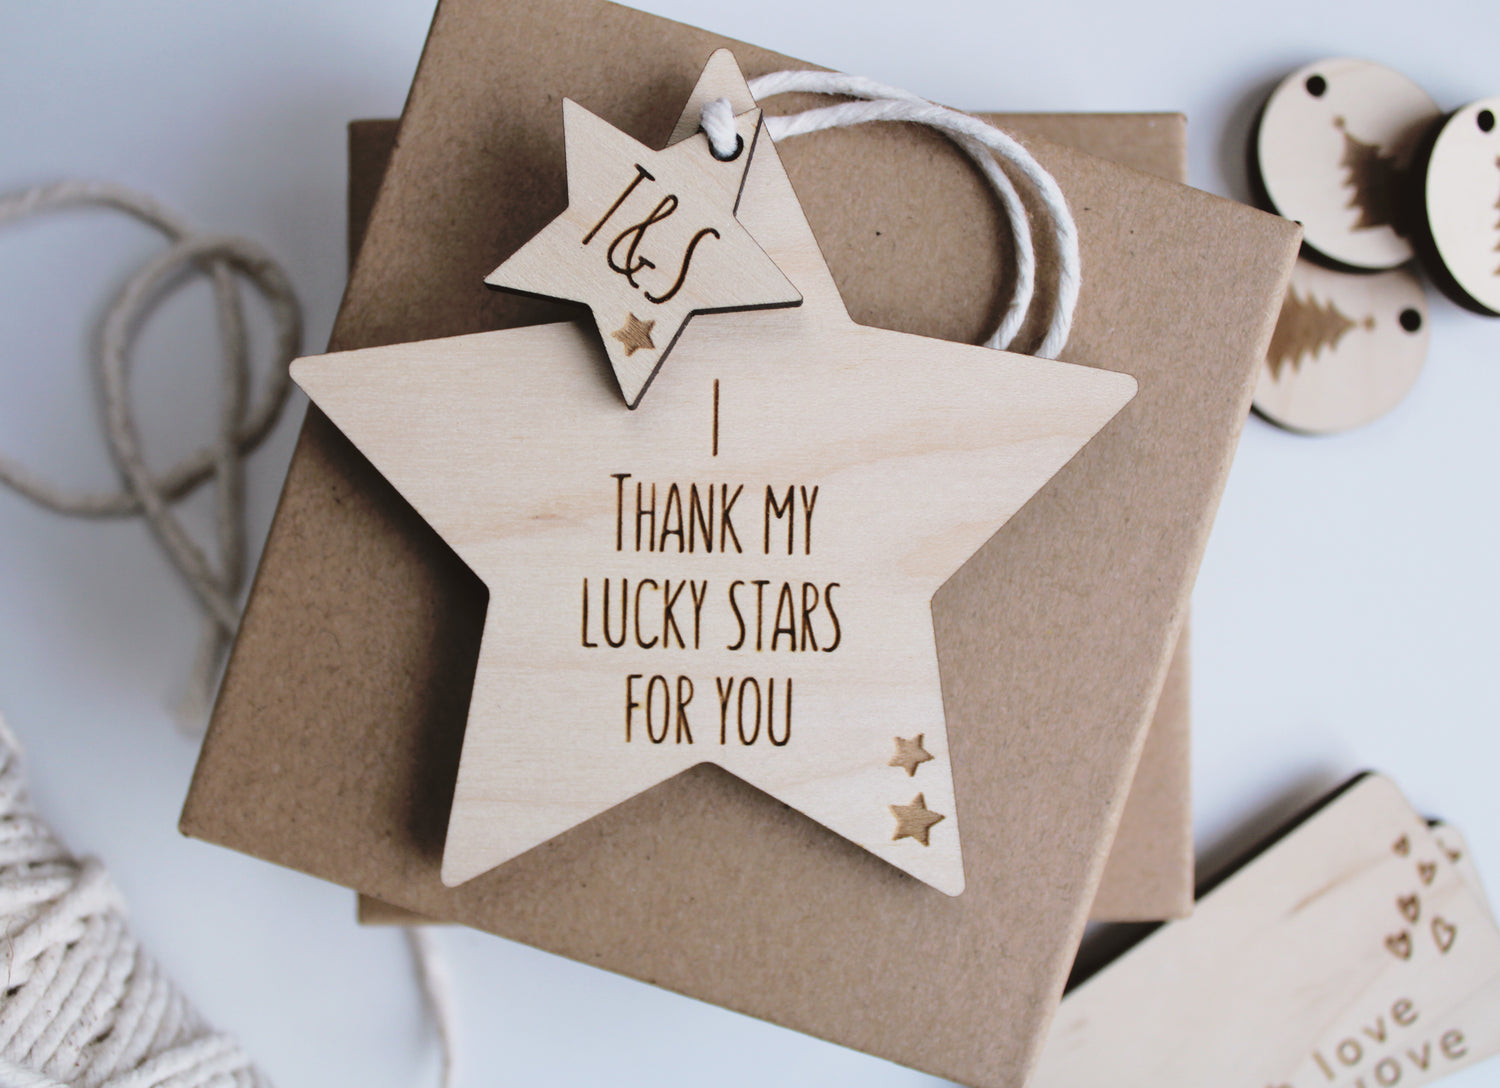 Star shaped ornament made from maple veneer and engraved with I thank my lucky stars for you